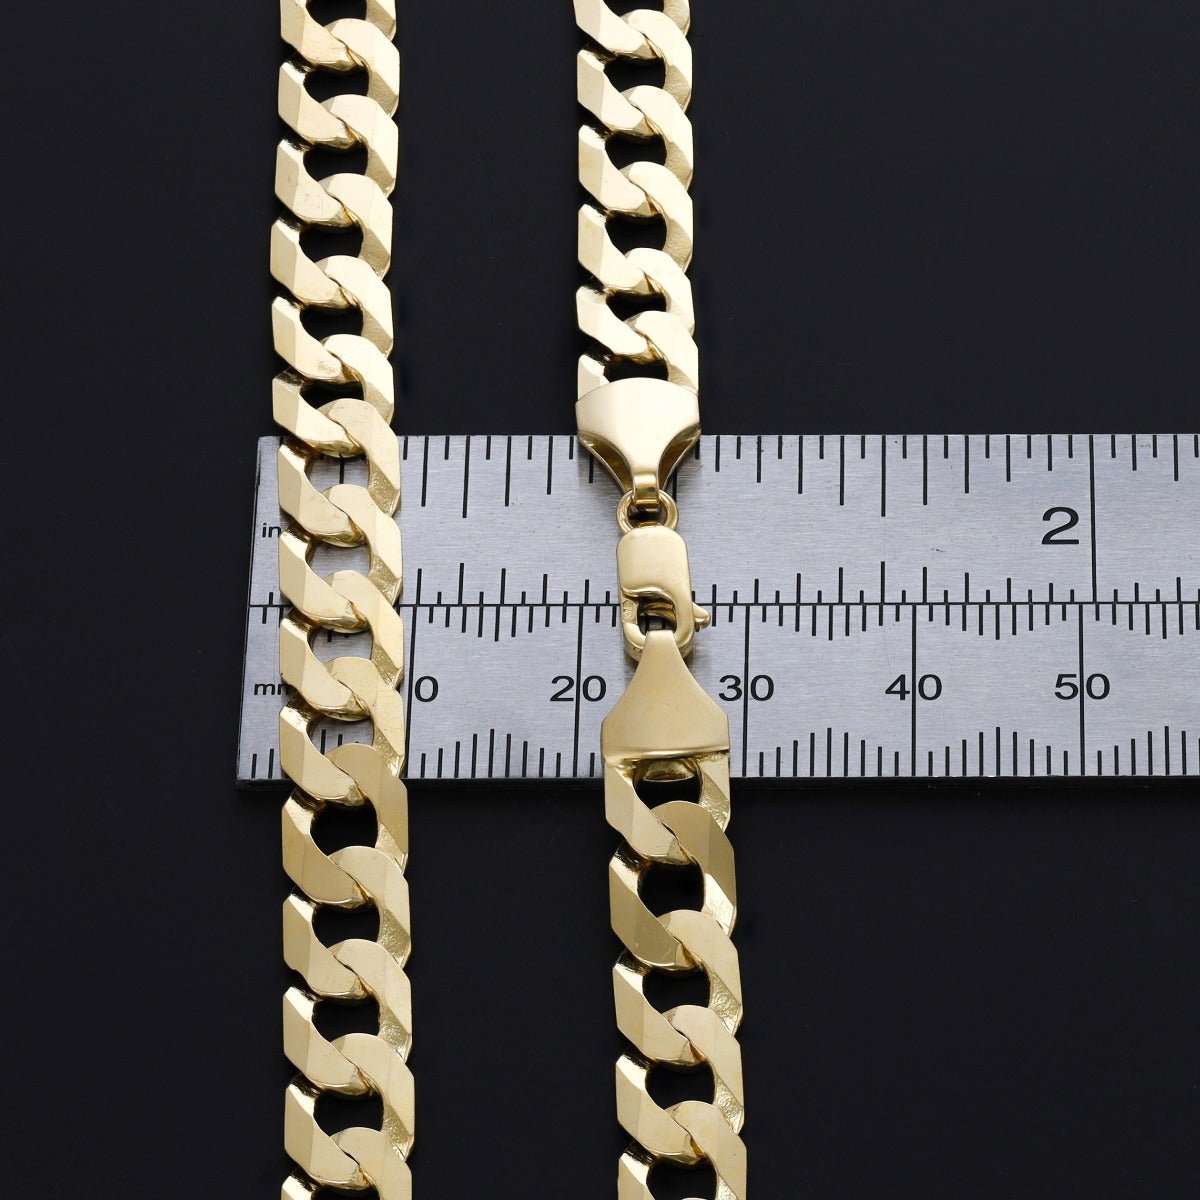 Pre-owned 9ct Yellow Gold Curb Chain - 27g - 20 Inches - FJewellery